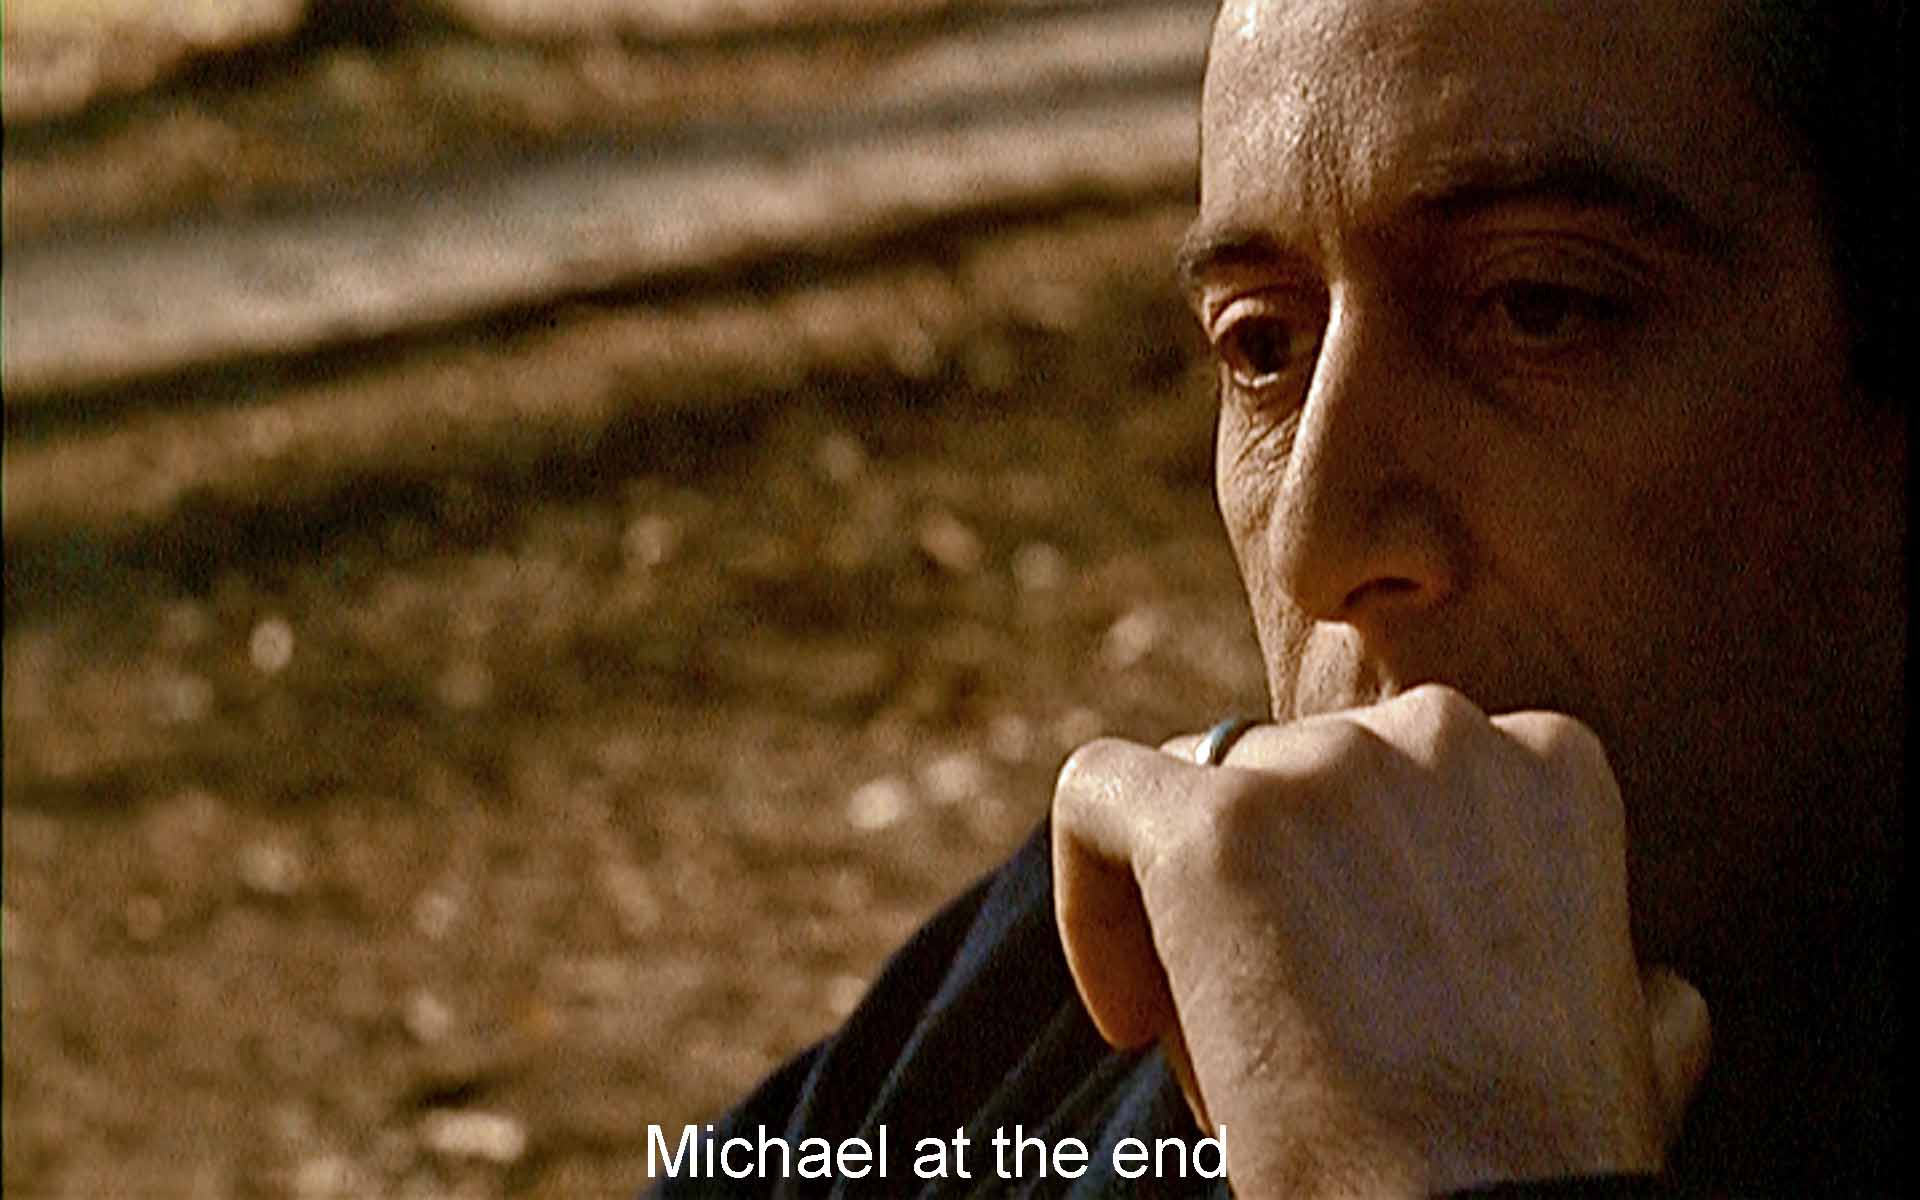 Michael at the end